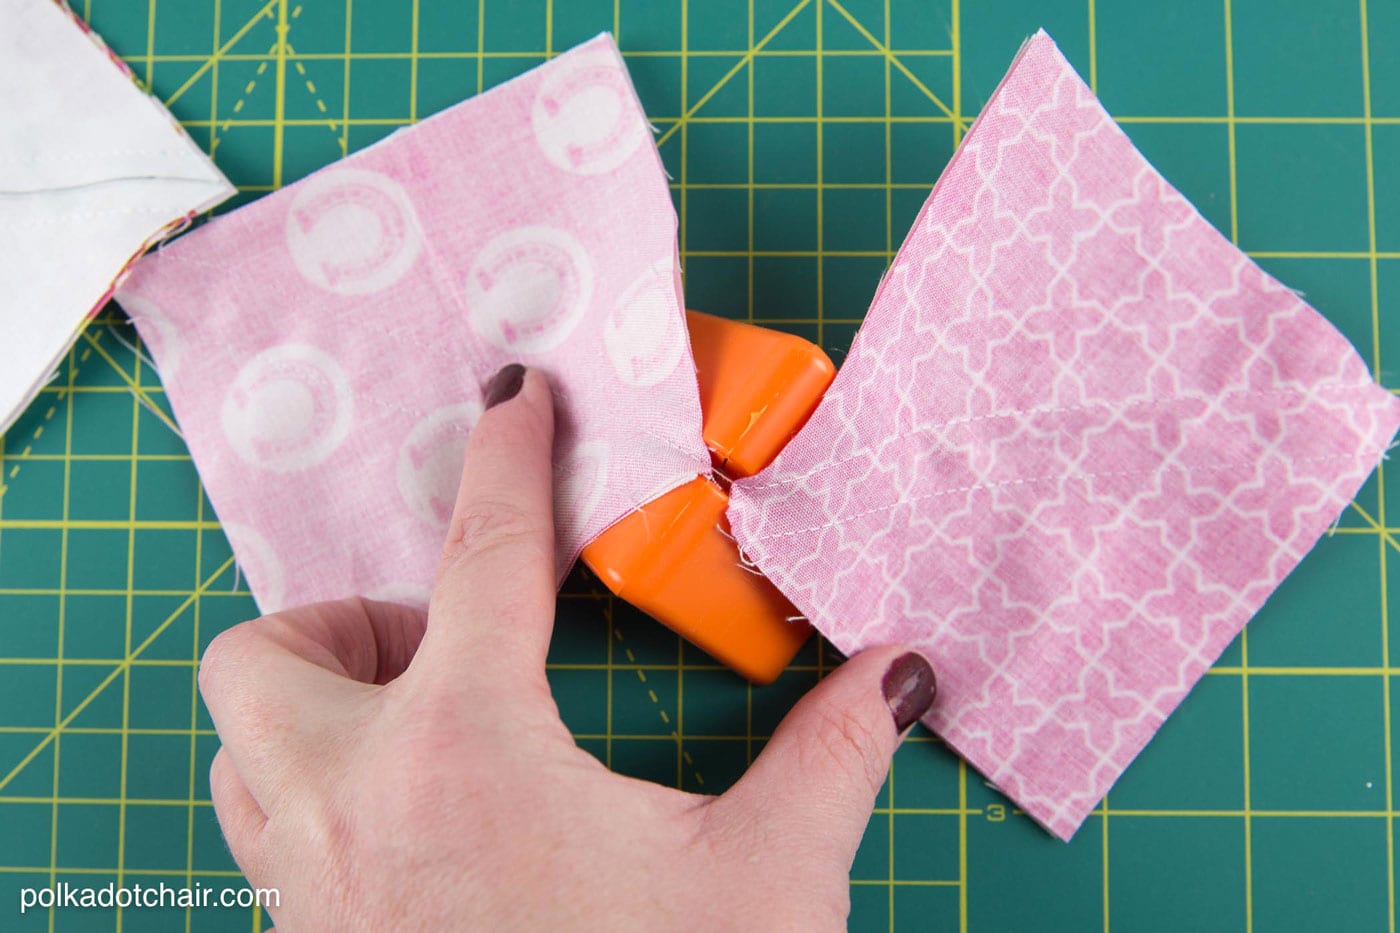 Tips and tricks to help you when you're constructing quilt blocks. Things like how to stay organized and how to trim HST blocks accurately. 